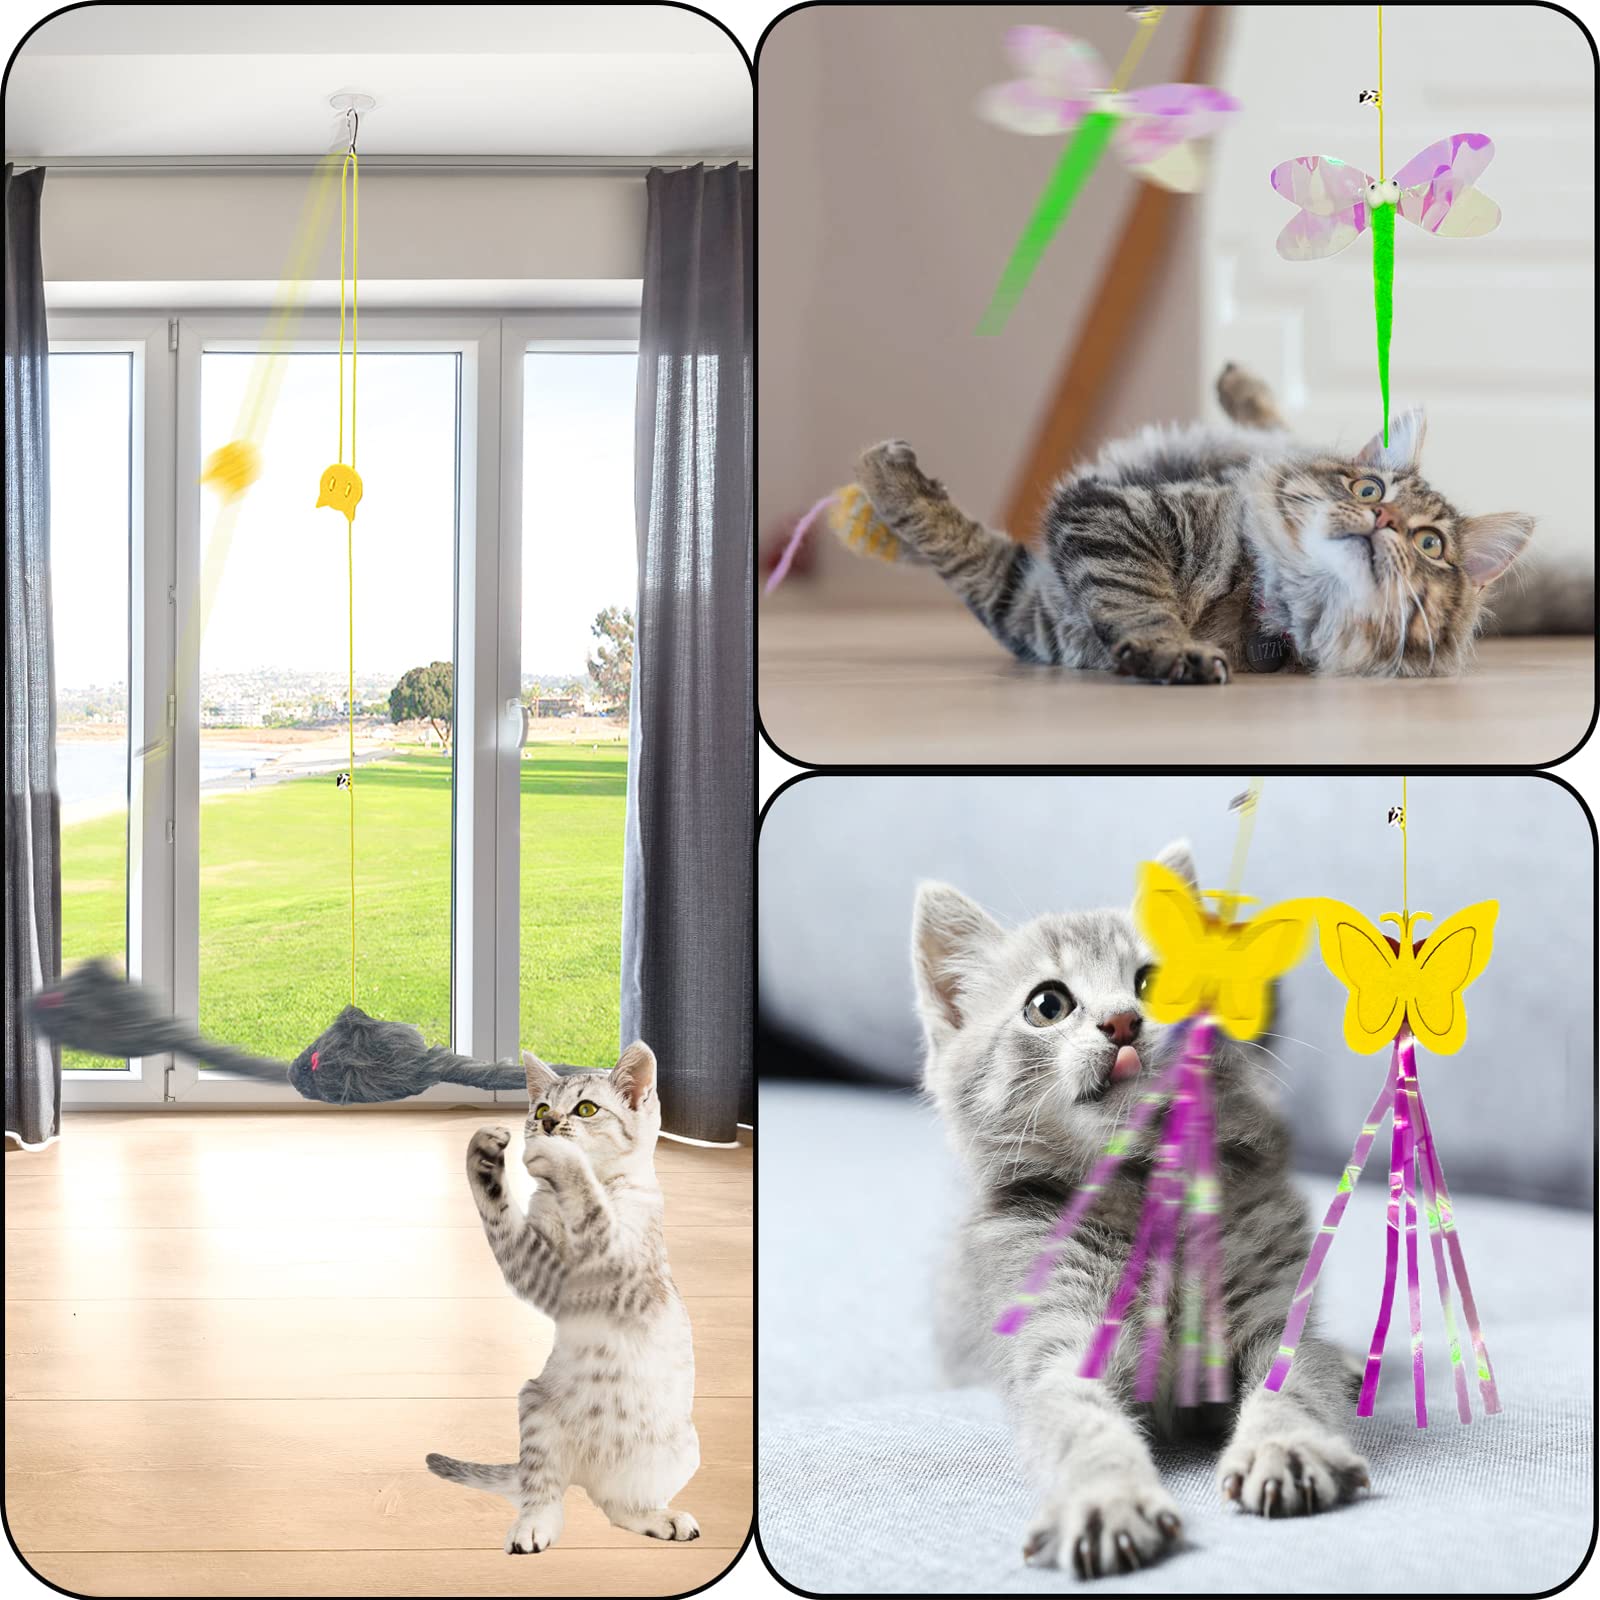 Mitubati Cat Toys Indoor Hanging Door Retractable Bird Cat Toy for Kitten Fun Exercise Interactive String Feather Cat Toys for Hunting Chase (6 Pack)